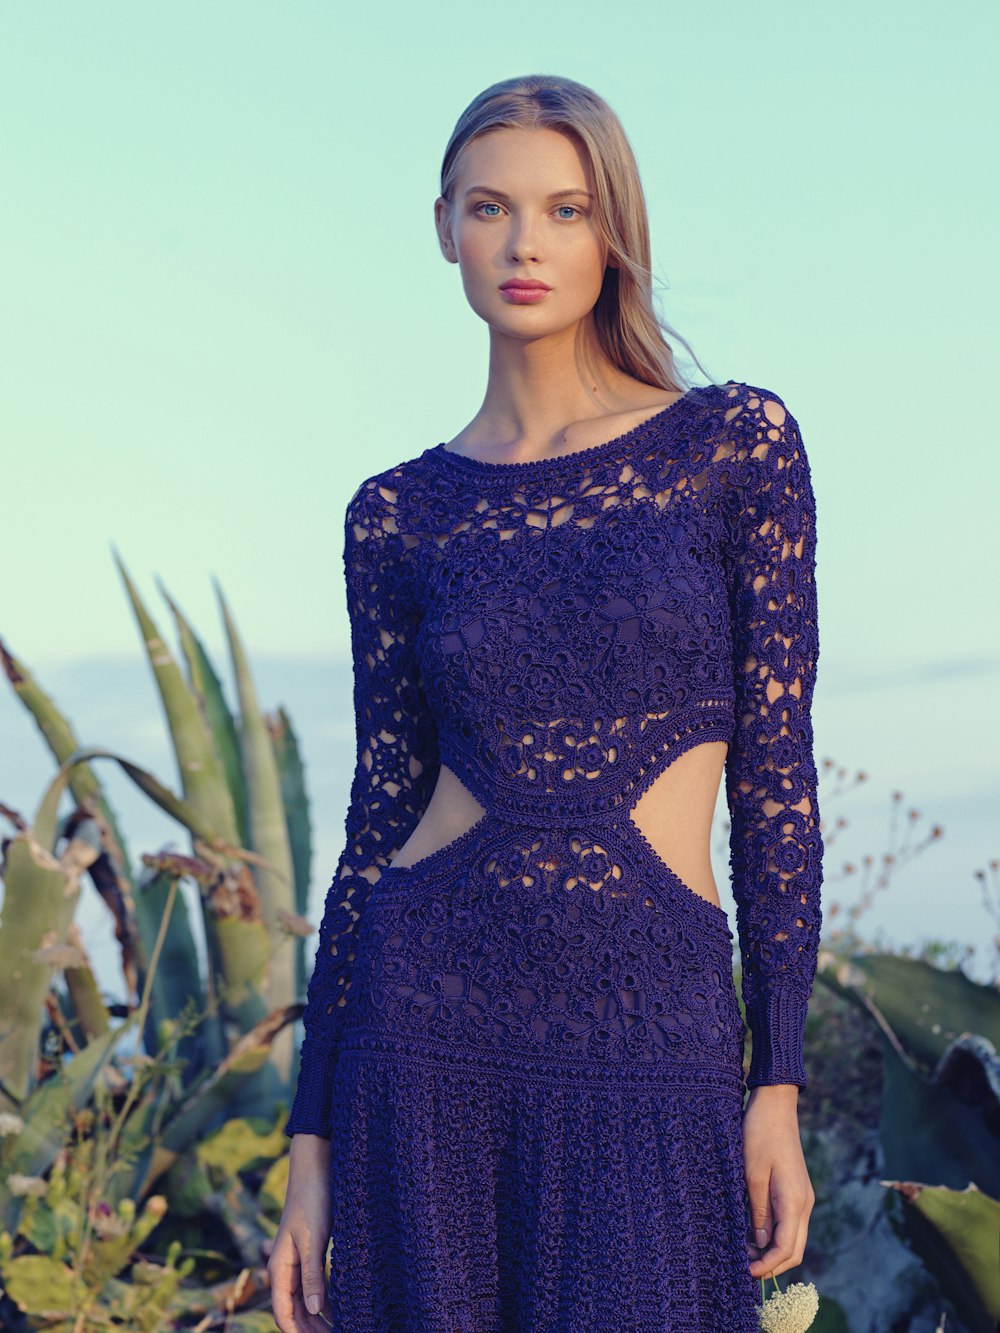 woman in purple lace knitted long-sleeved dress during daytime